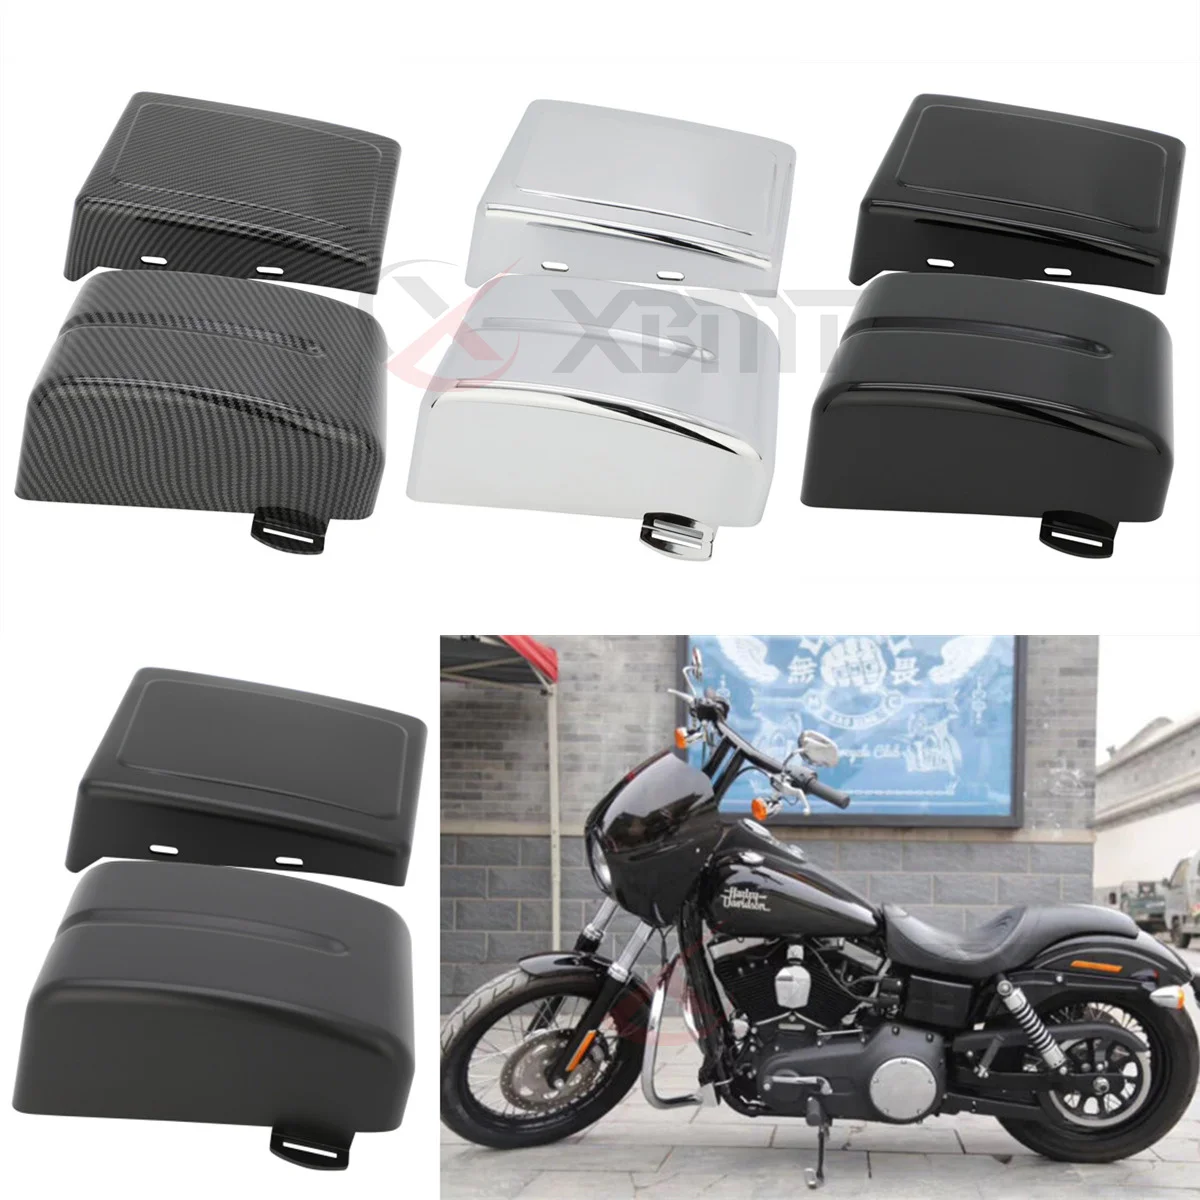 Motorcycle ABS Plastic Battery Side Cover For Harley Dyna Fat Street Bob Low Rider FXDL Switchback FLD 2012 2013 2014 2015-2017